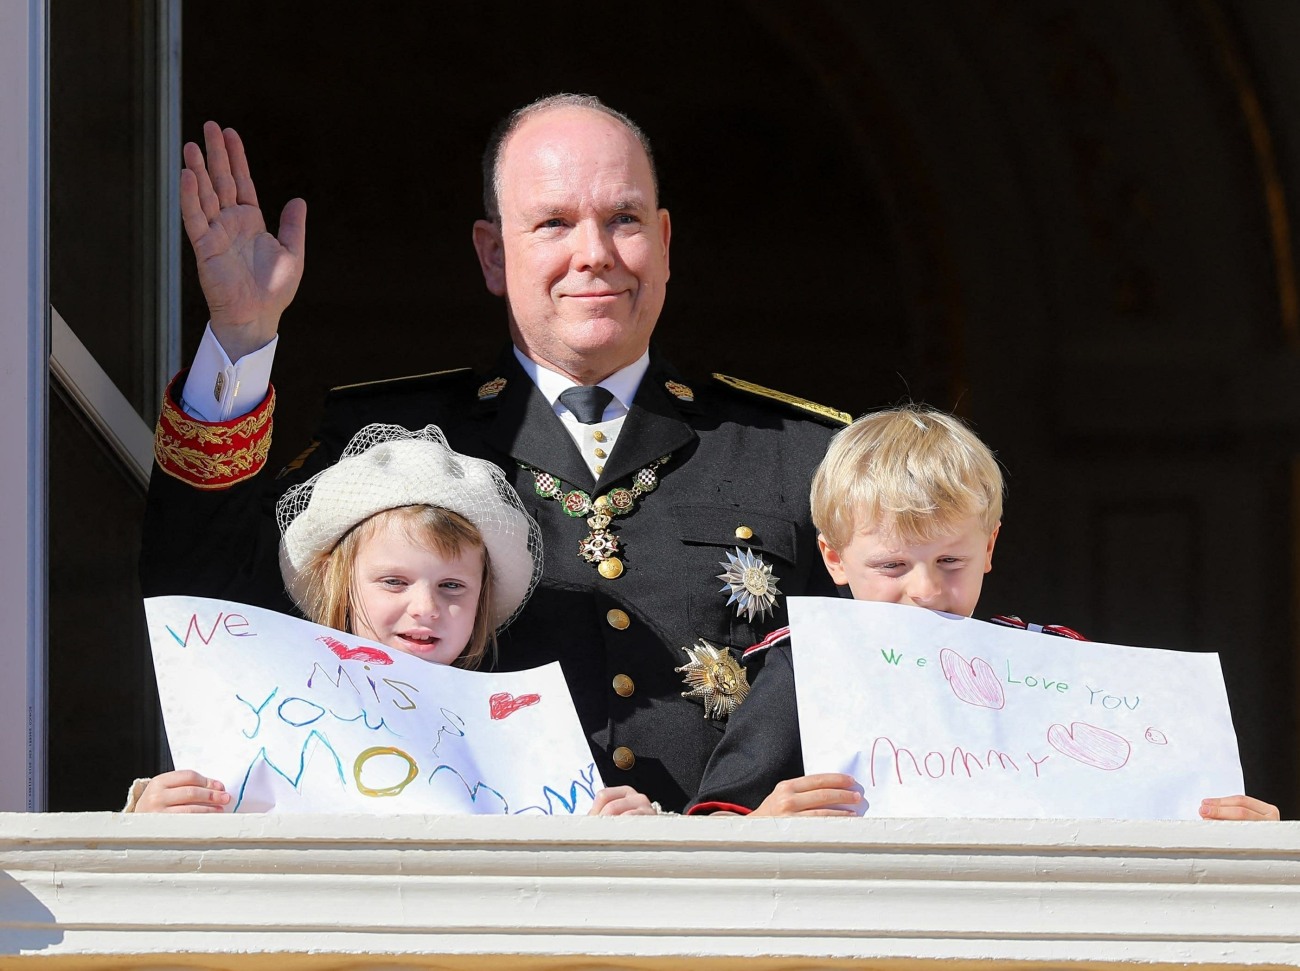 The princely family on the balcony during Monaco's national day